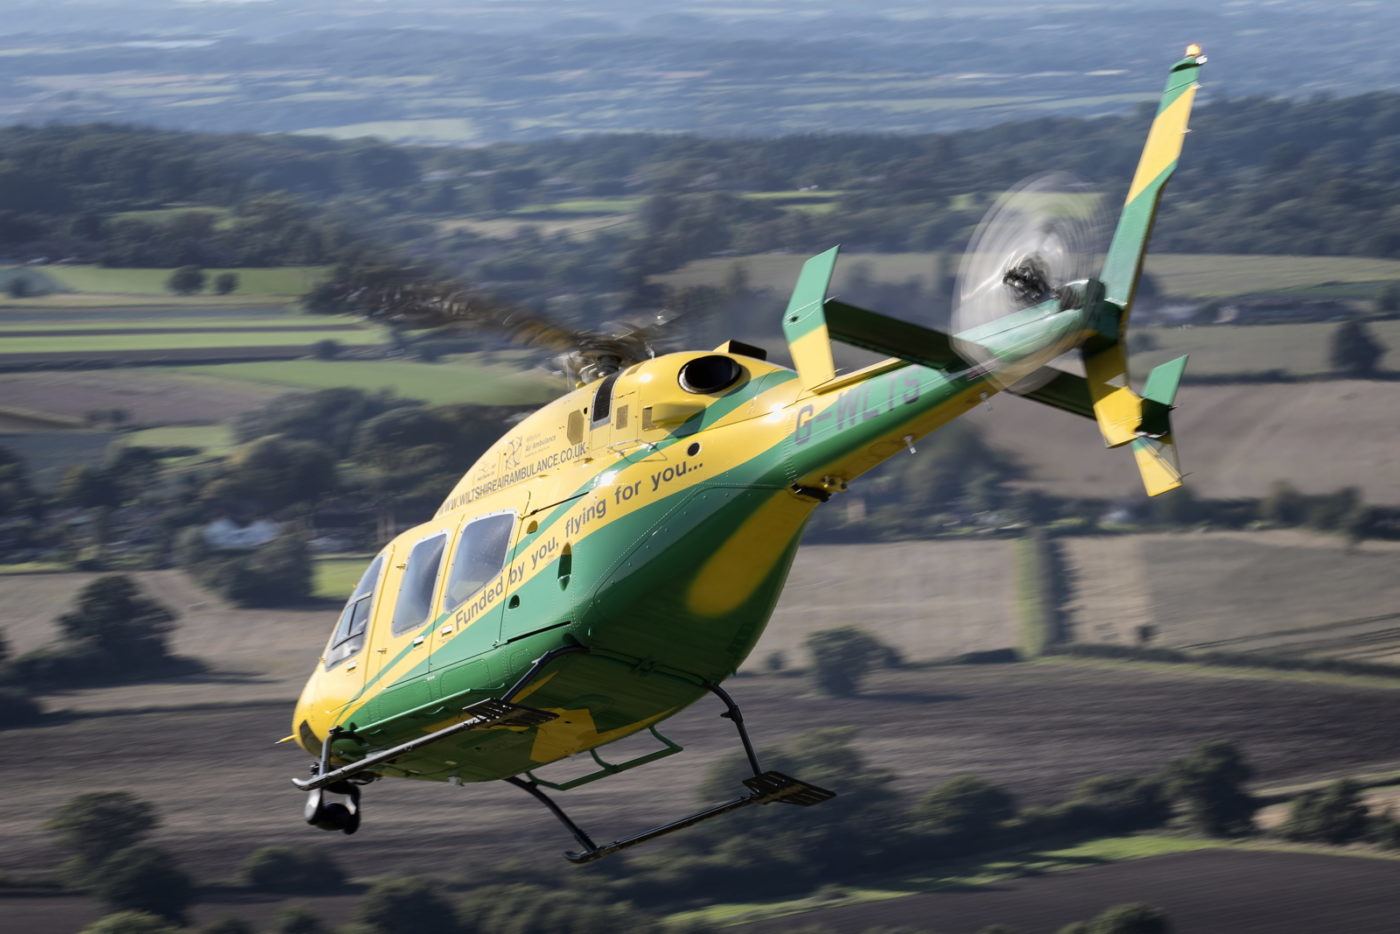 Wiltshire Air Ambulance's Bell 429 helicopter in flight